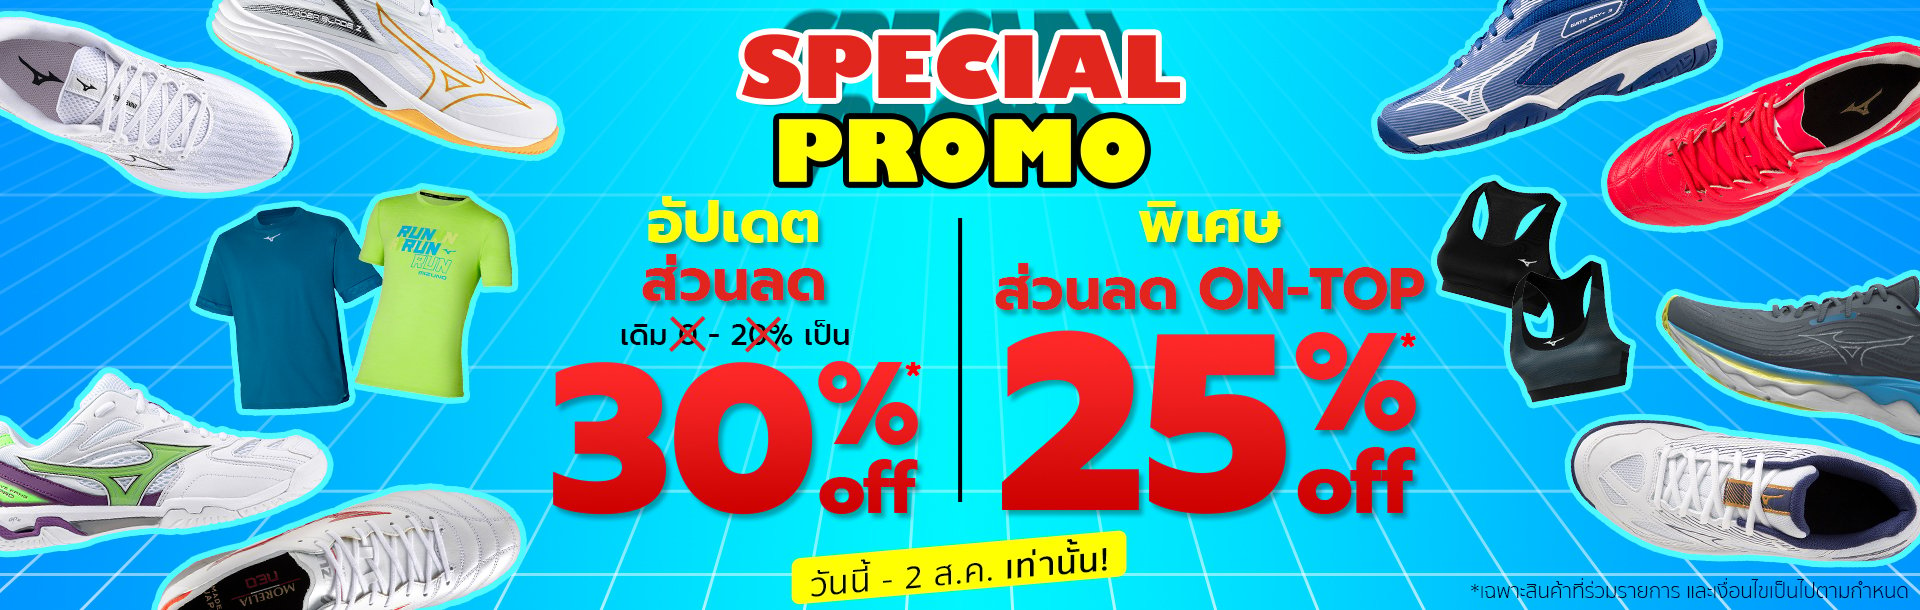 ON TOP 25% DISCOUNT PROMOTION